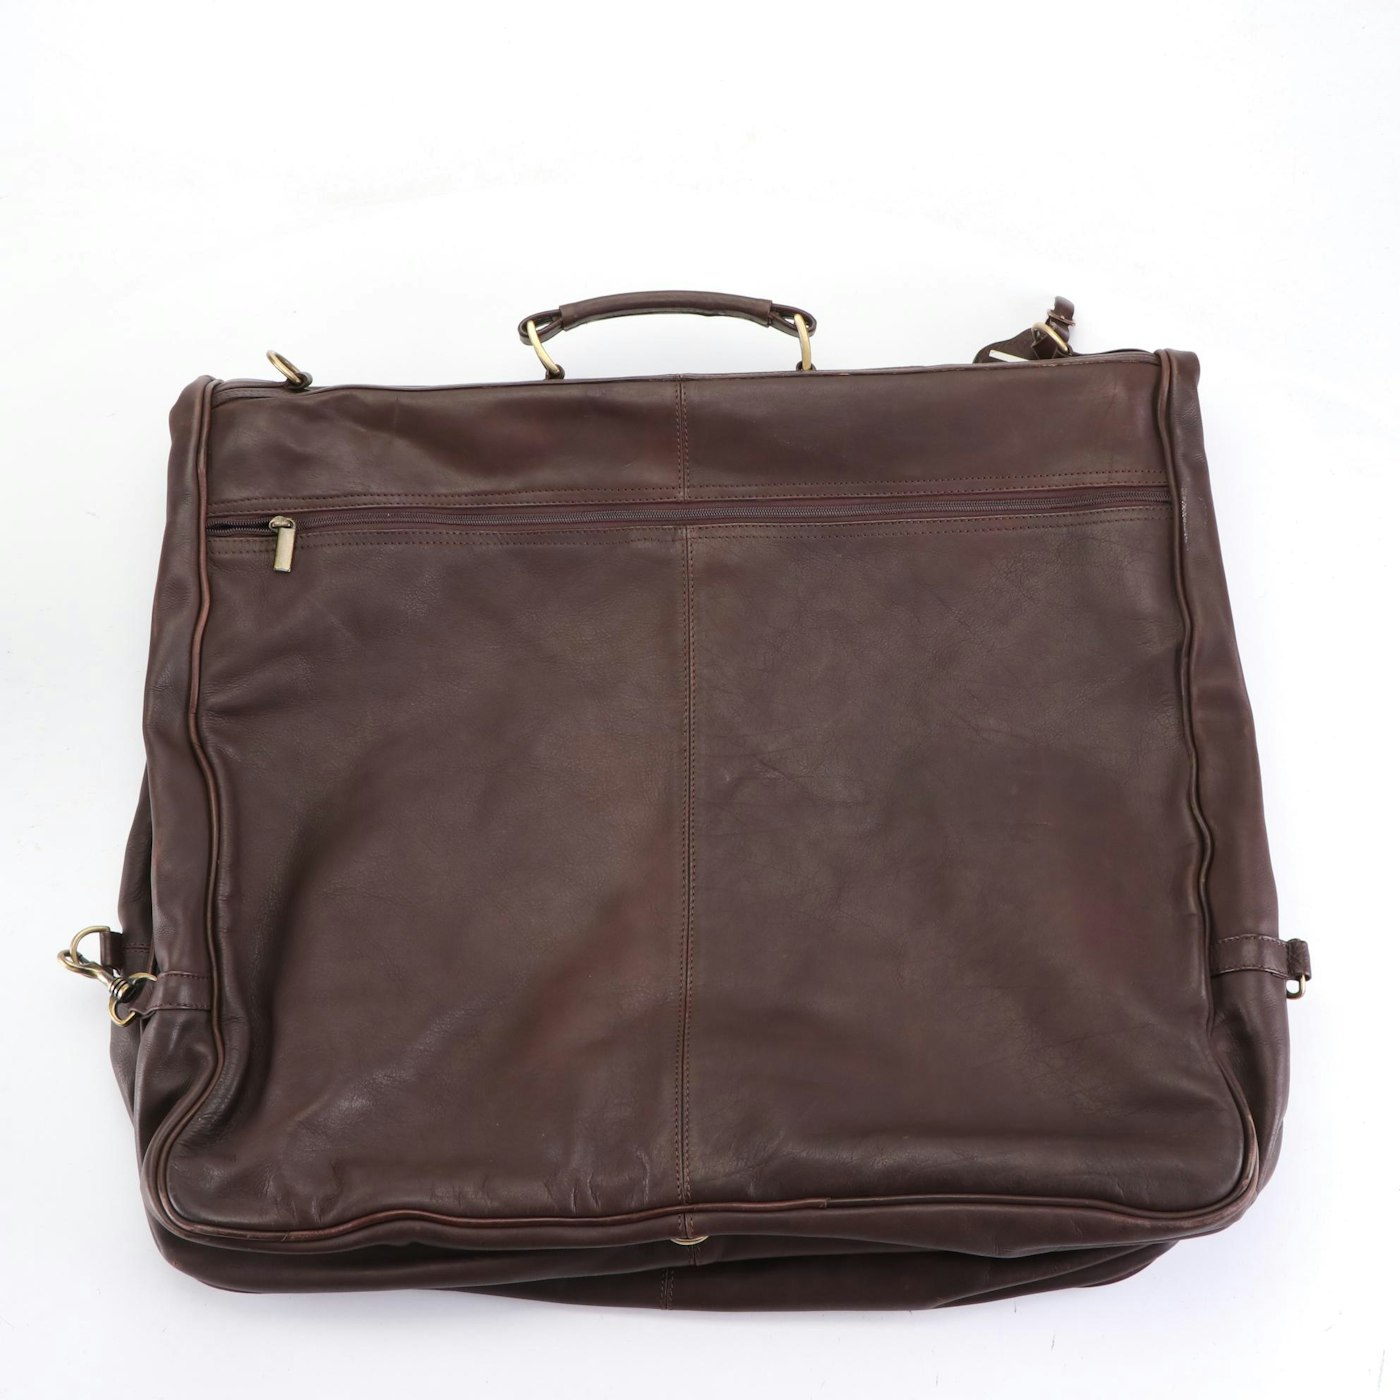 Avenues America Brown Leather Garment Bag with Crossbody Strap | EBTH